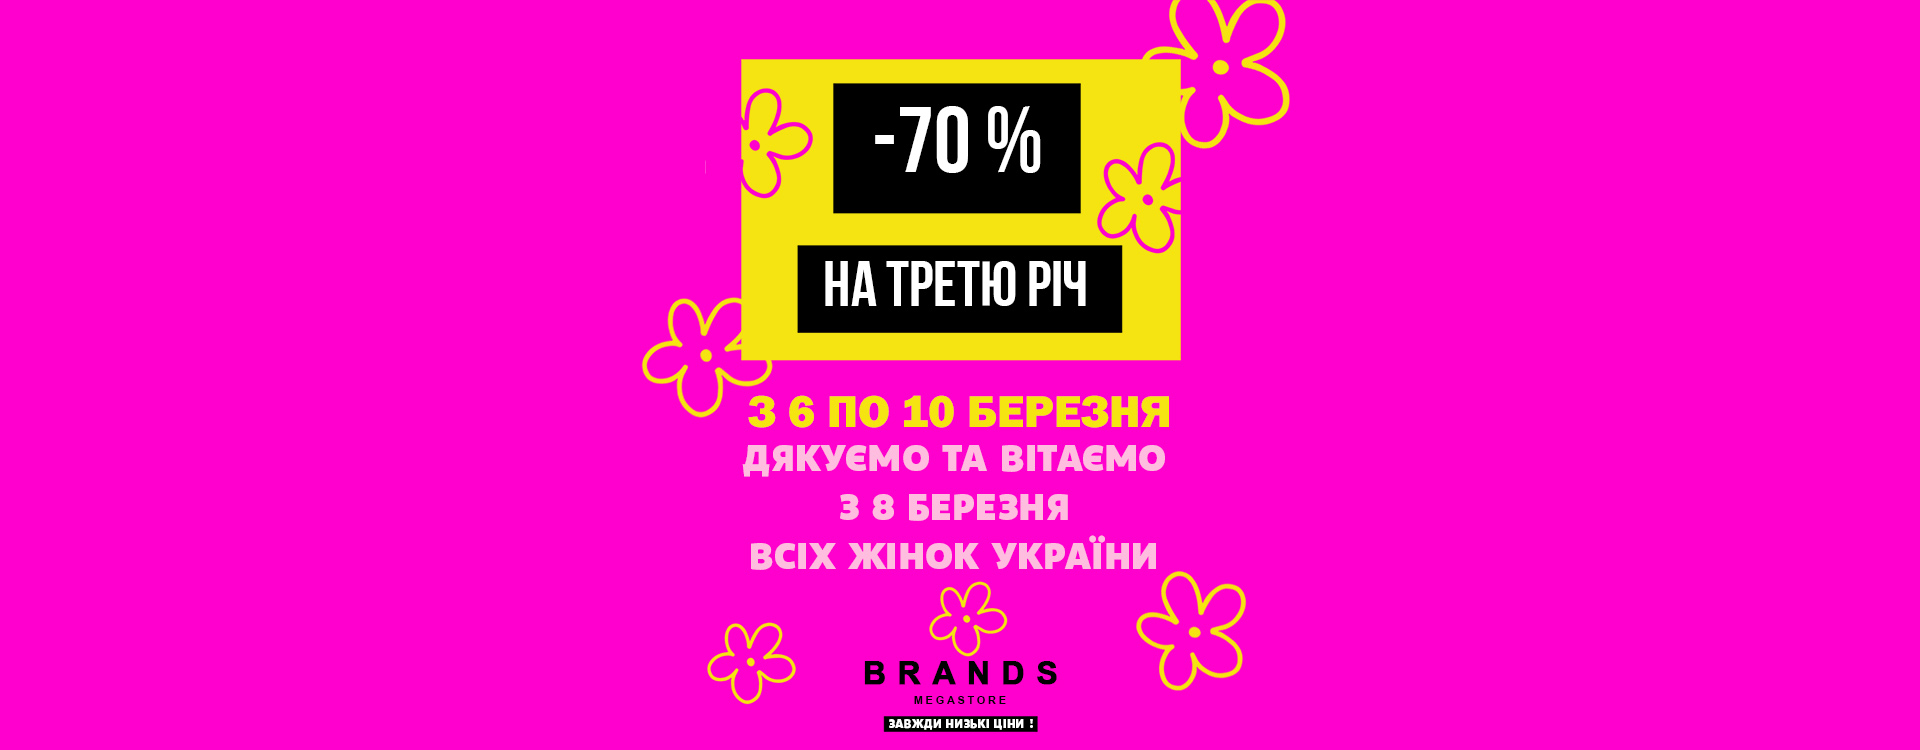 Brands Outlet offers a discount of -70%